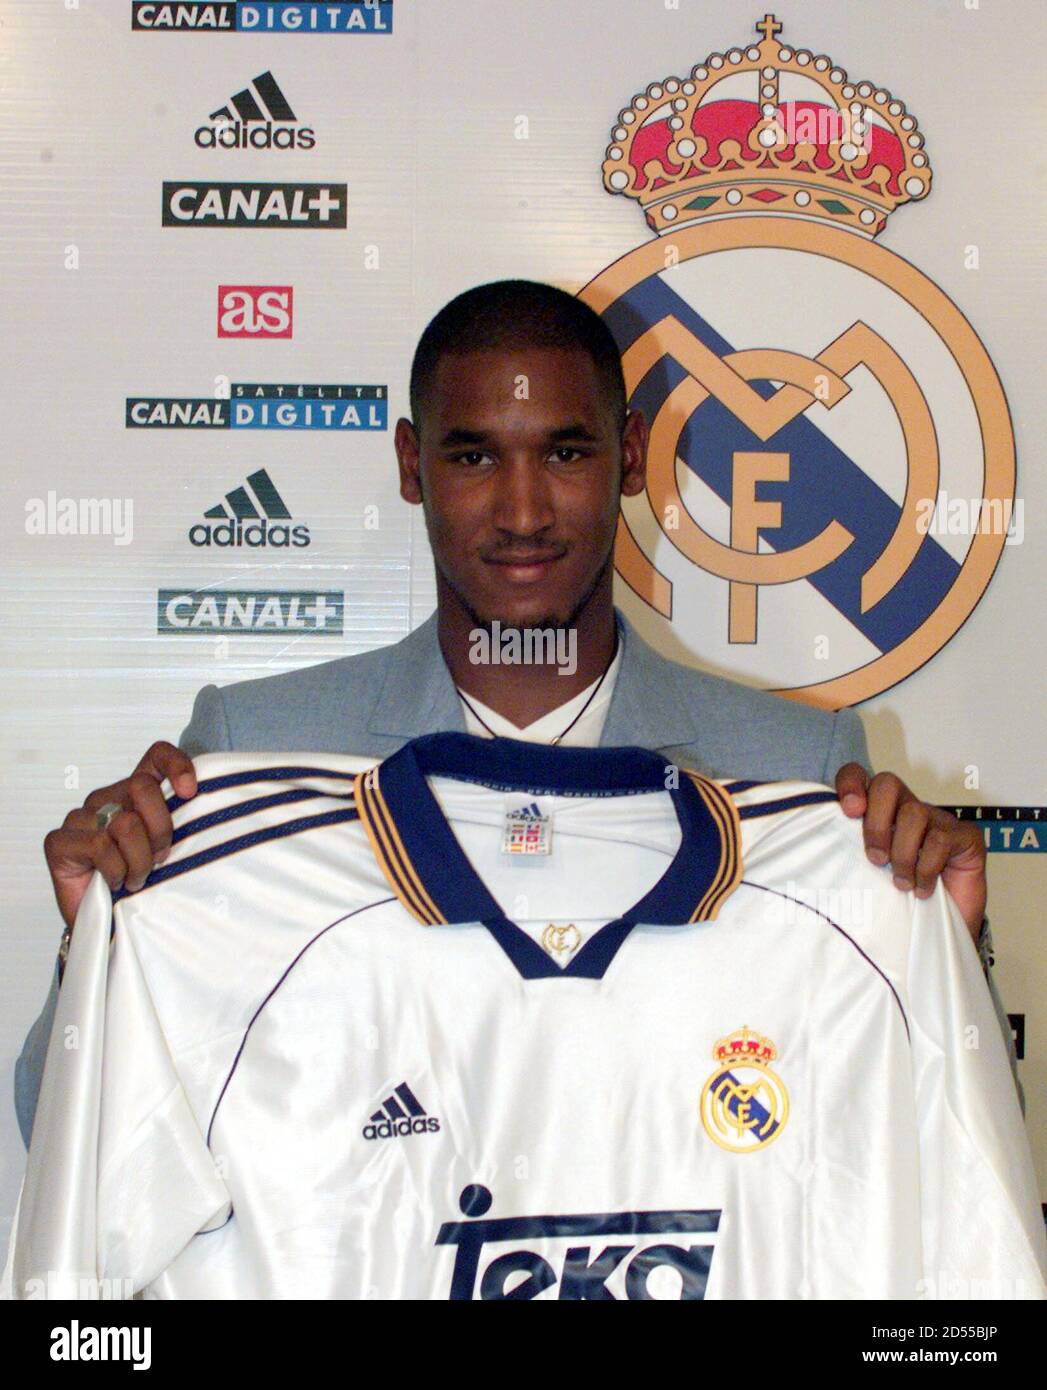 French soccer star Nicolas Anelka up Real Madrid's shirt after his presentation former European Champions new player at Santiago Bernabeu stadium August 5. Anelka's tranfer from English Premier League club